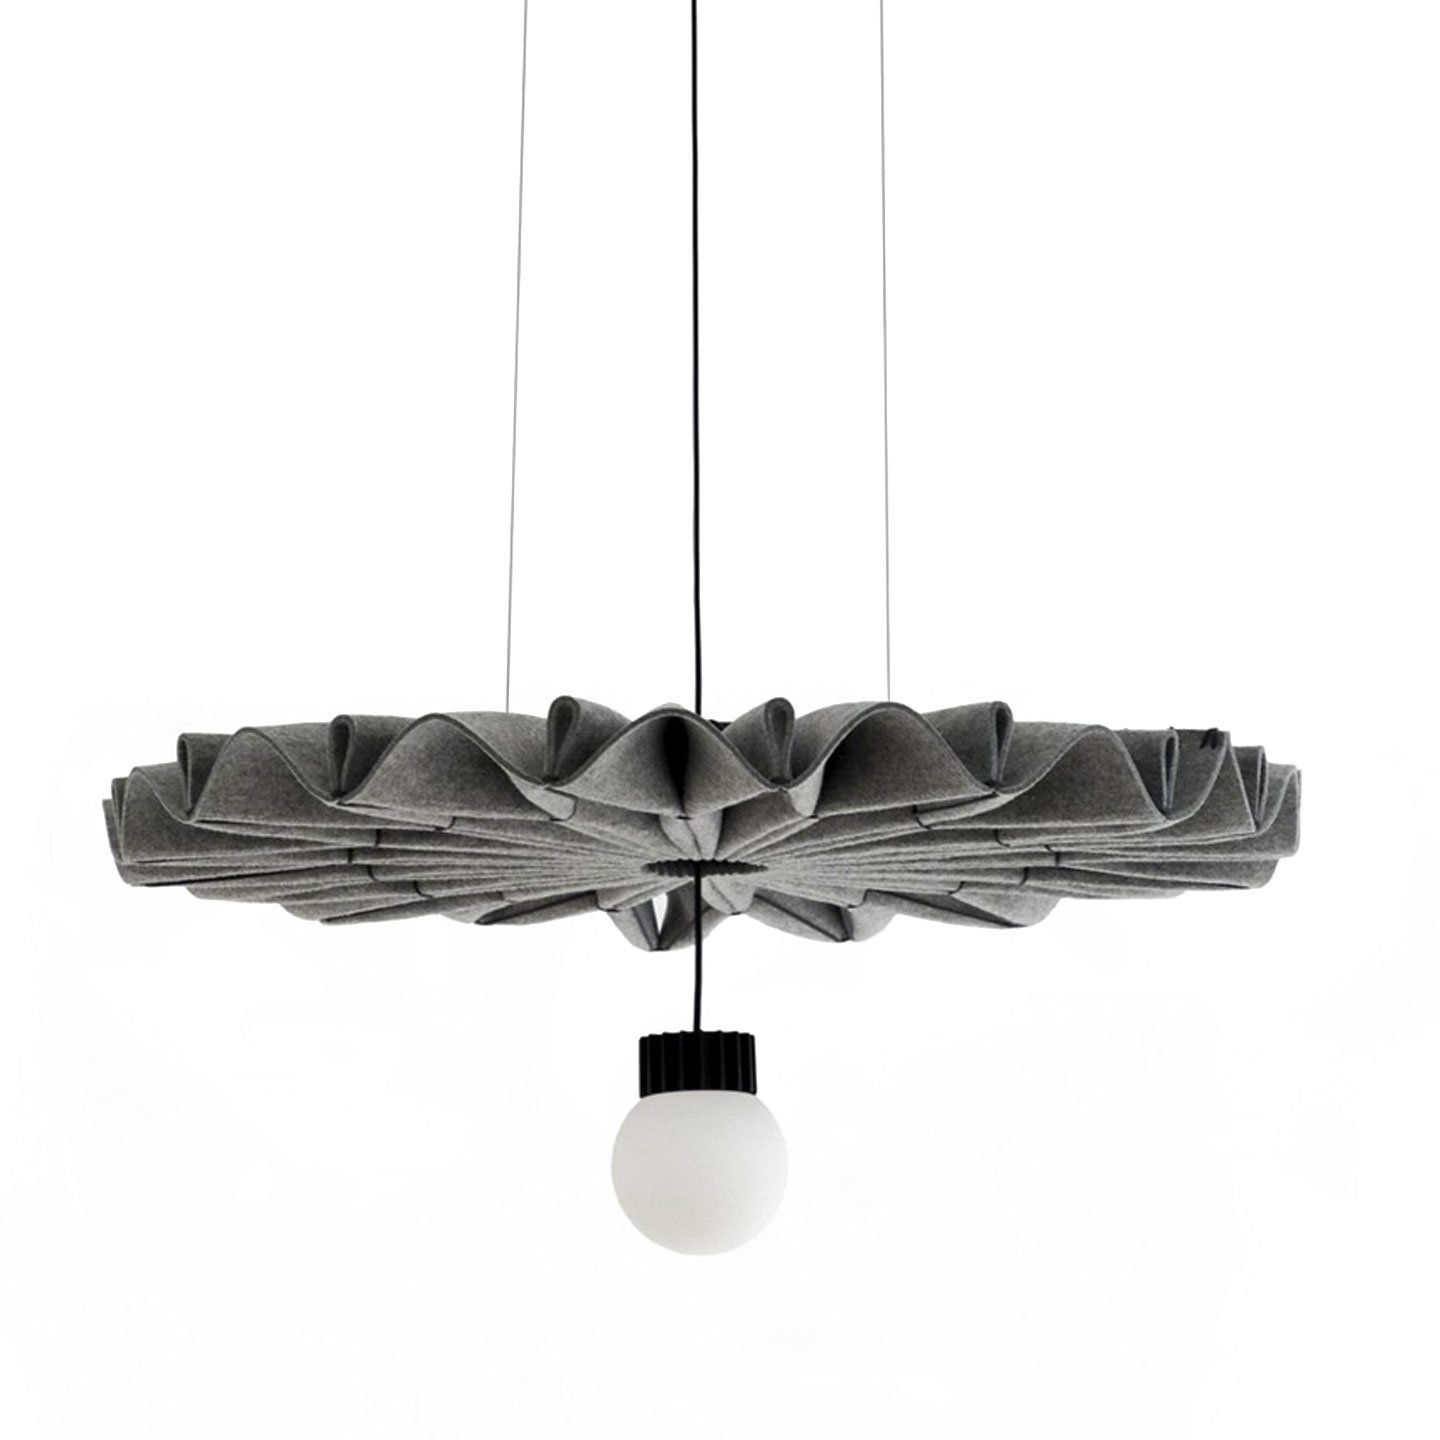 Haworth BuzziPleat LED Lighting with light hanging down from grey cloth